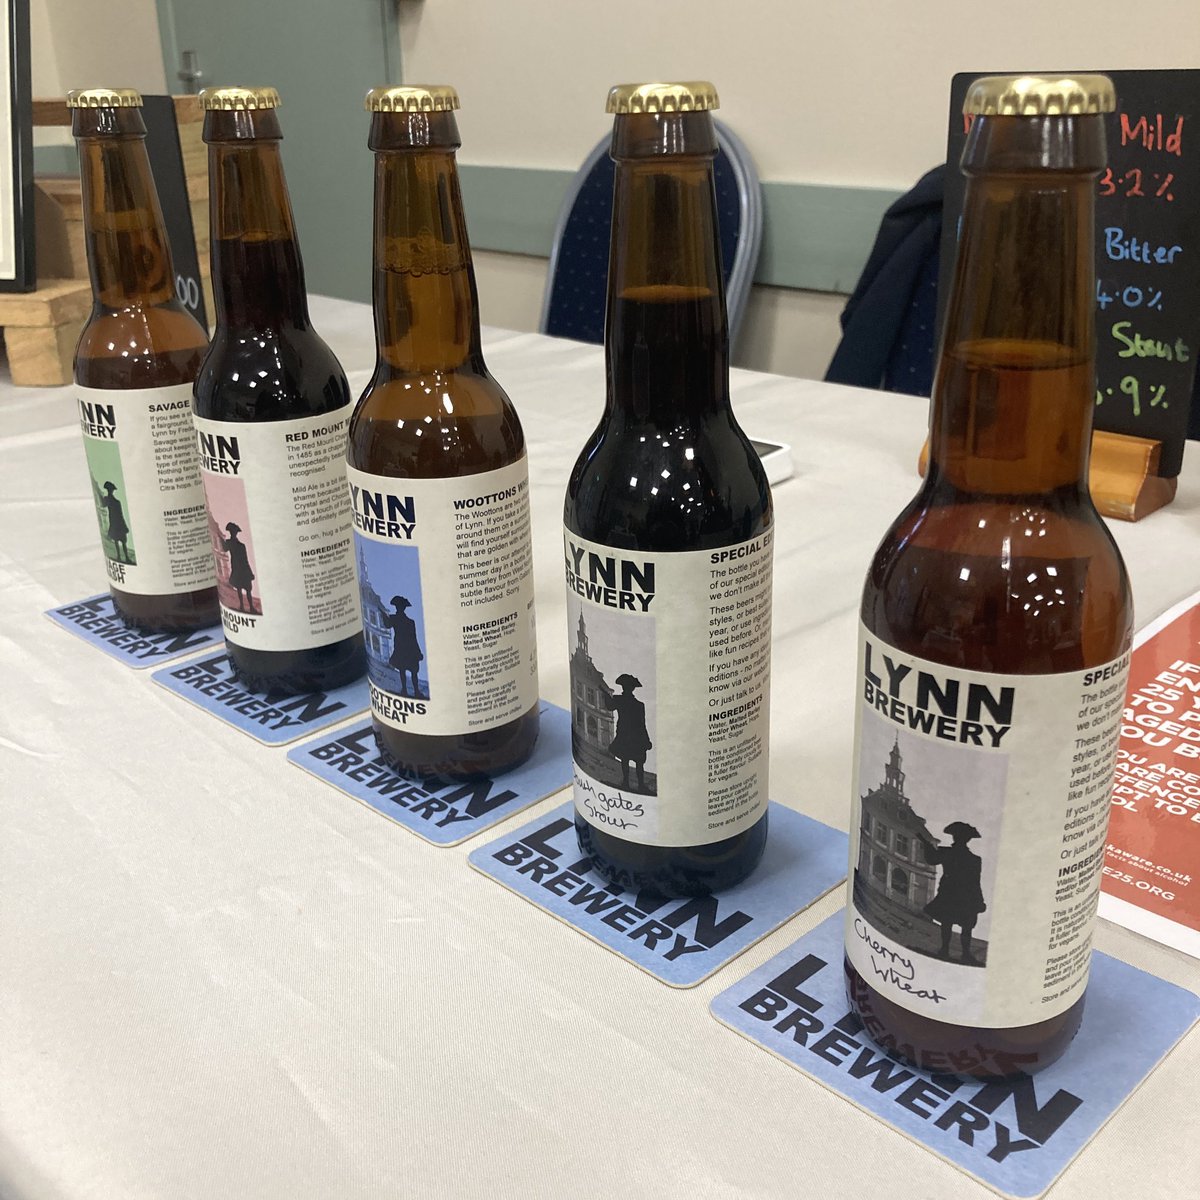 It’s the first North Wootton Village Market of the year! We have five beers on sale today - although with fairly limited stocks of some of them. We’re at North Wootton Village Hall until 2pm. Hope to see you later!